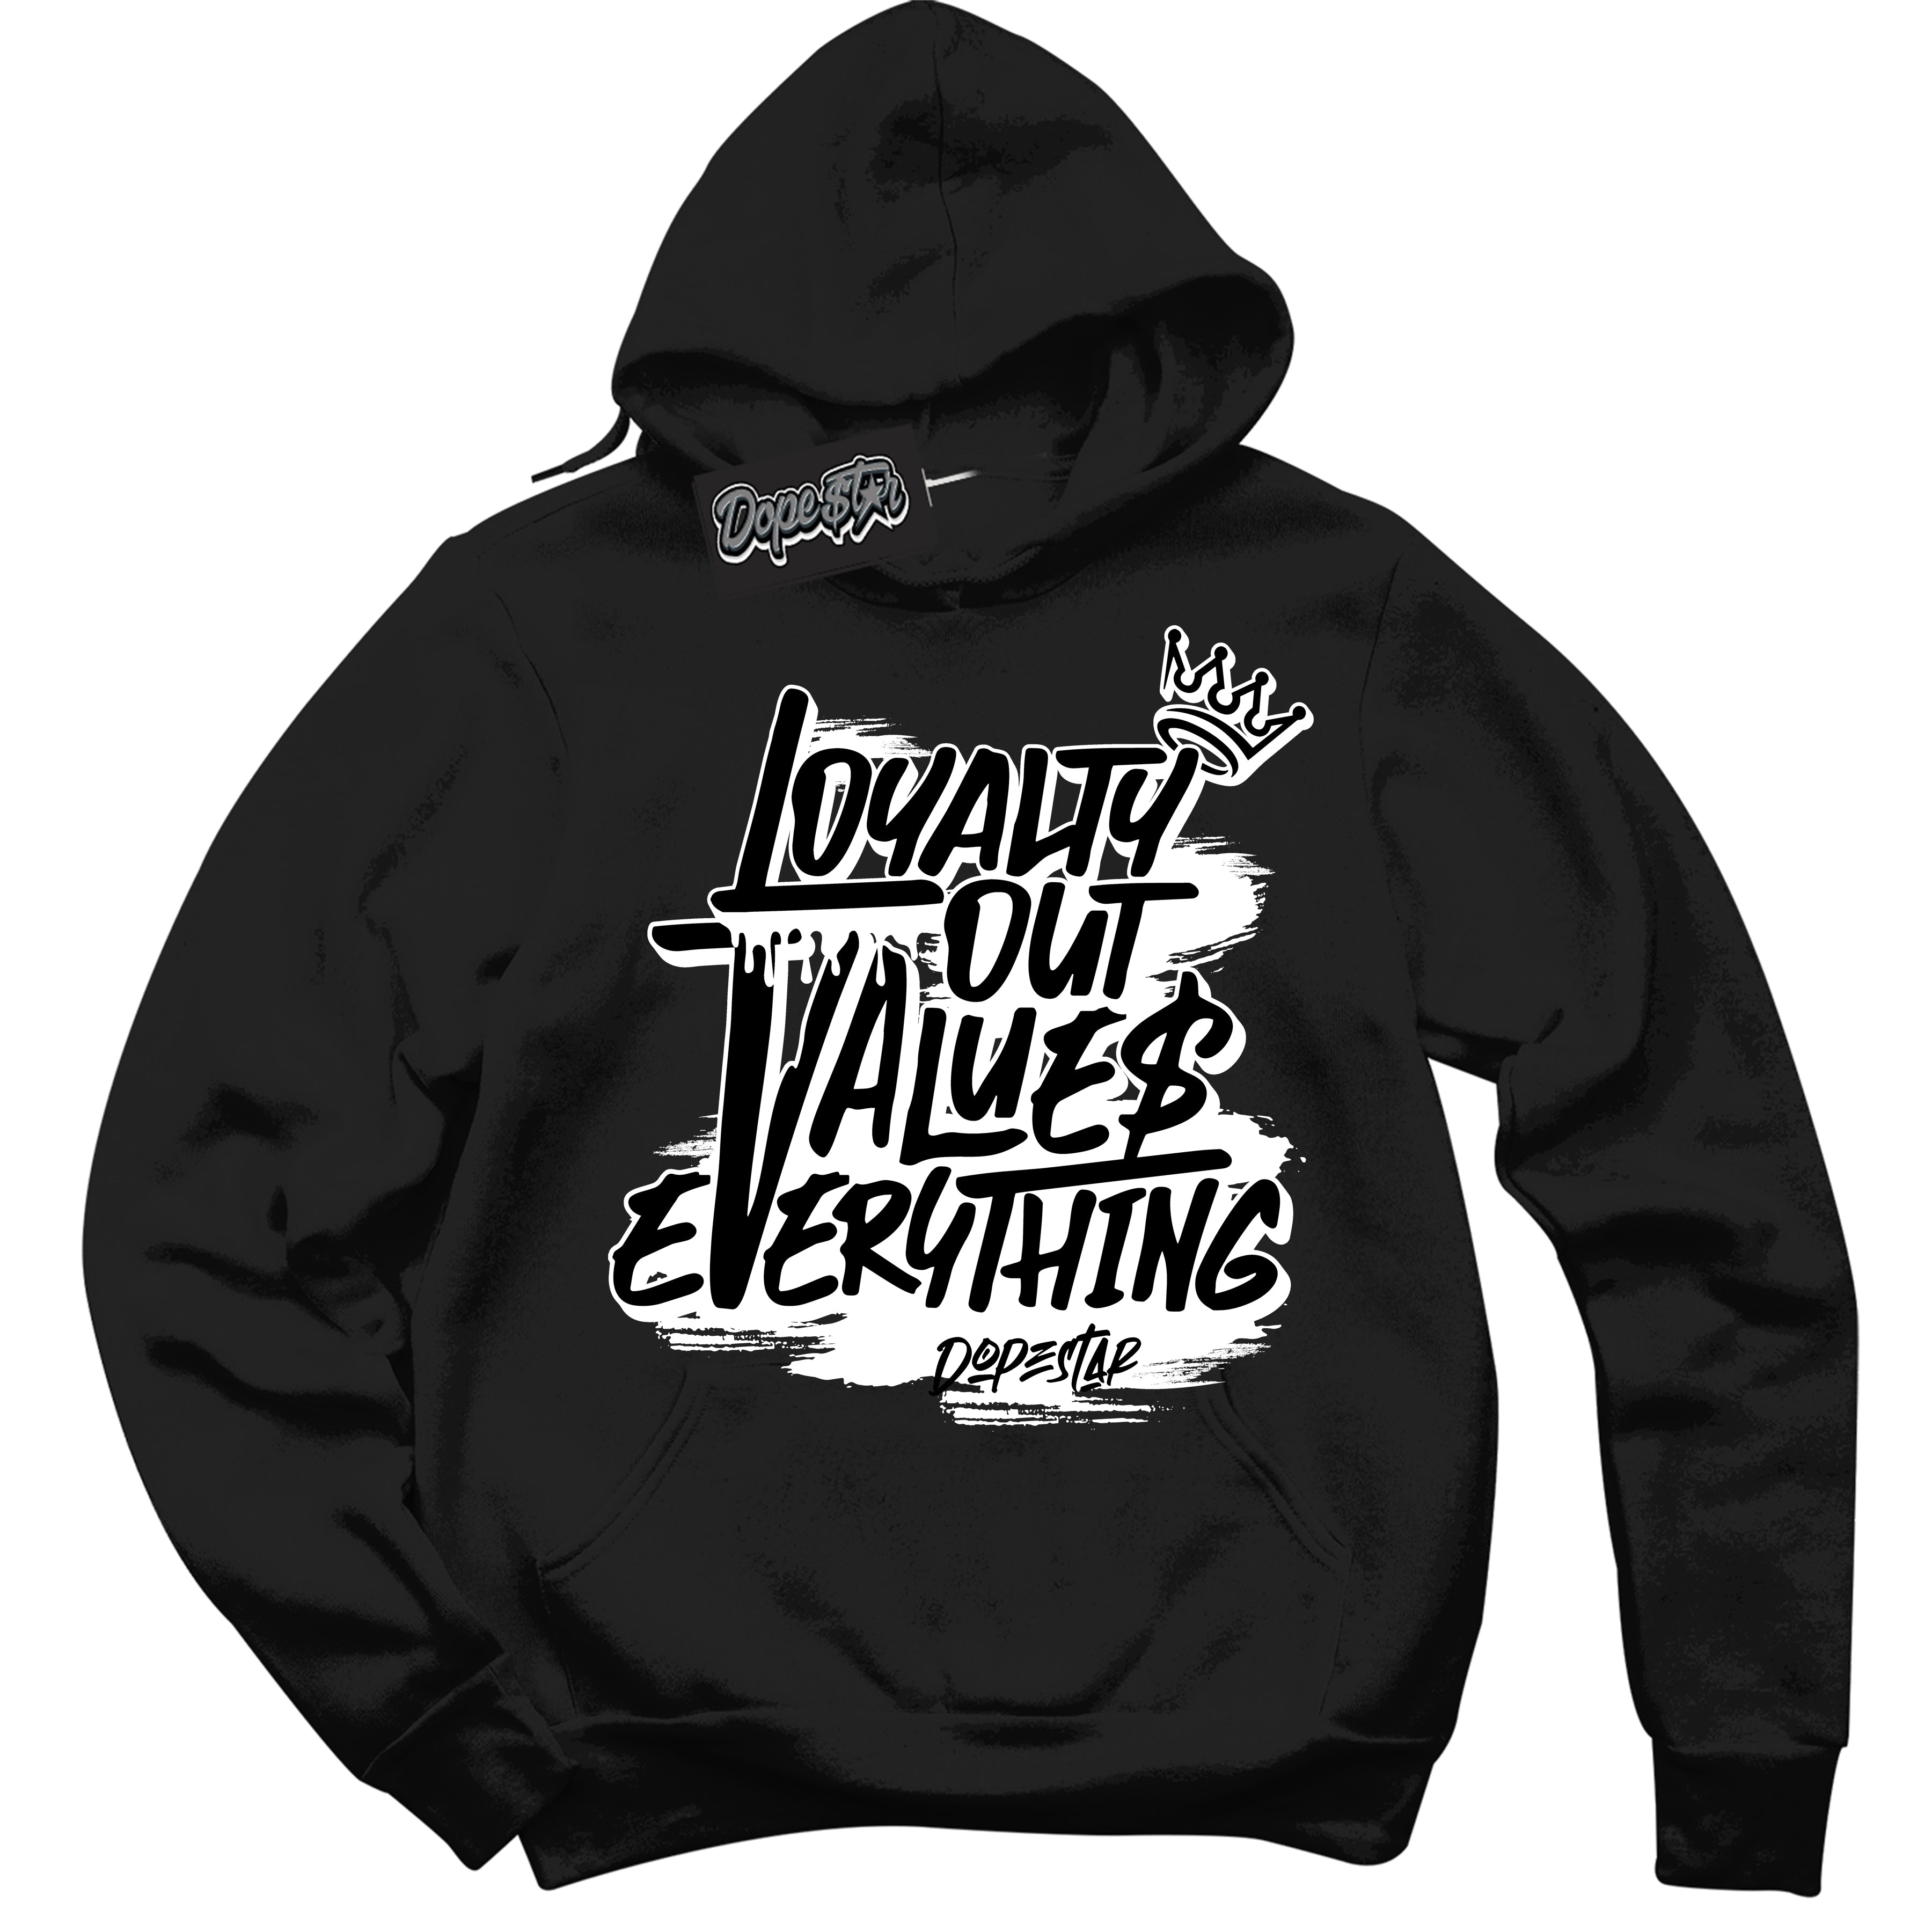 Cool Black Hoodie with “ Loyalty Out Values Everything ”  design that Perfectly Matches  Black White 14s Sneakers.